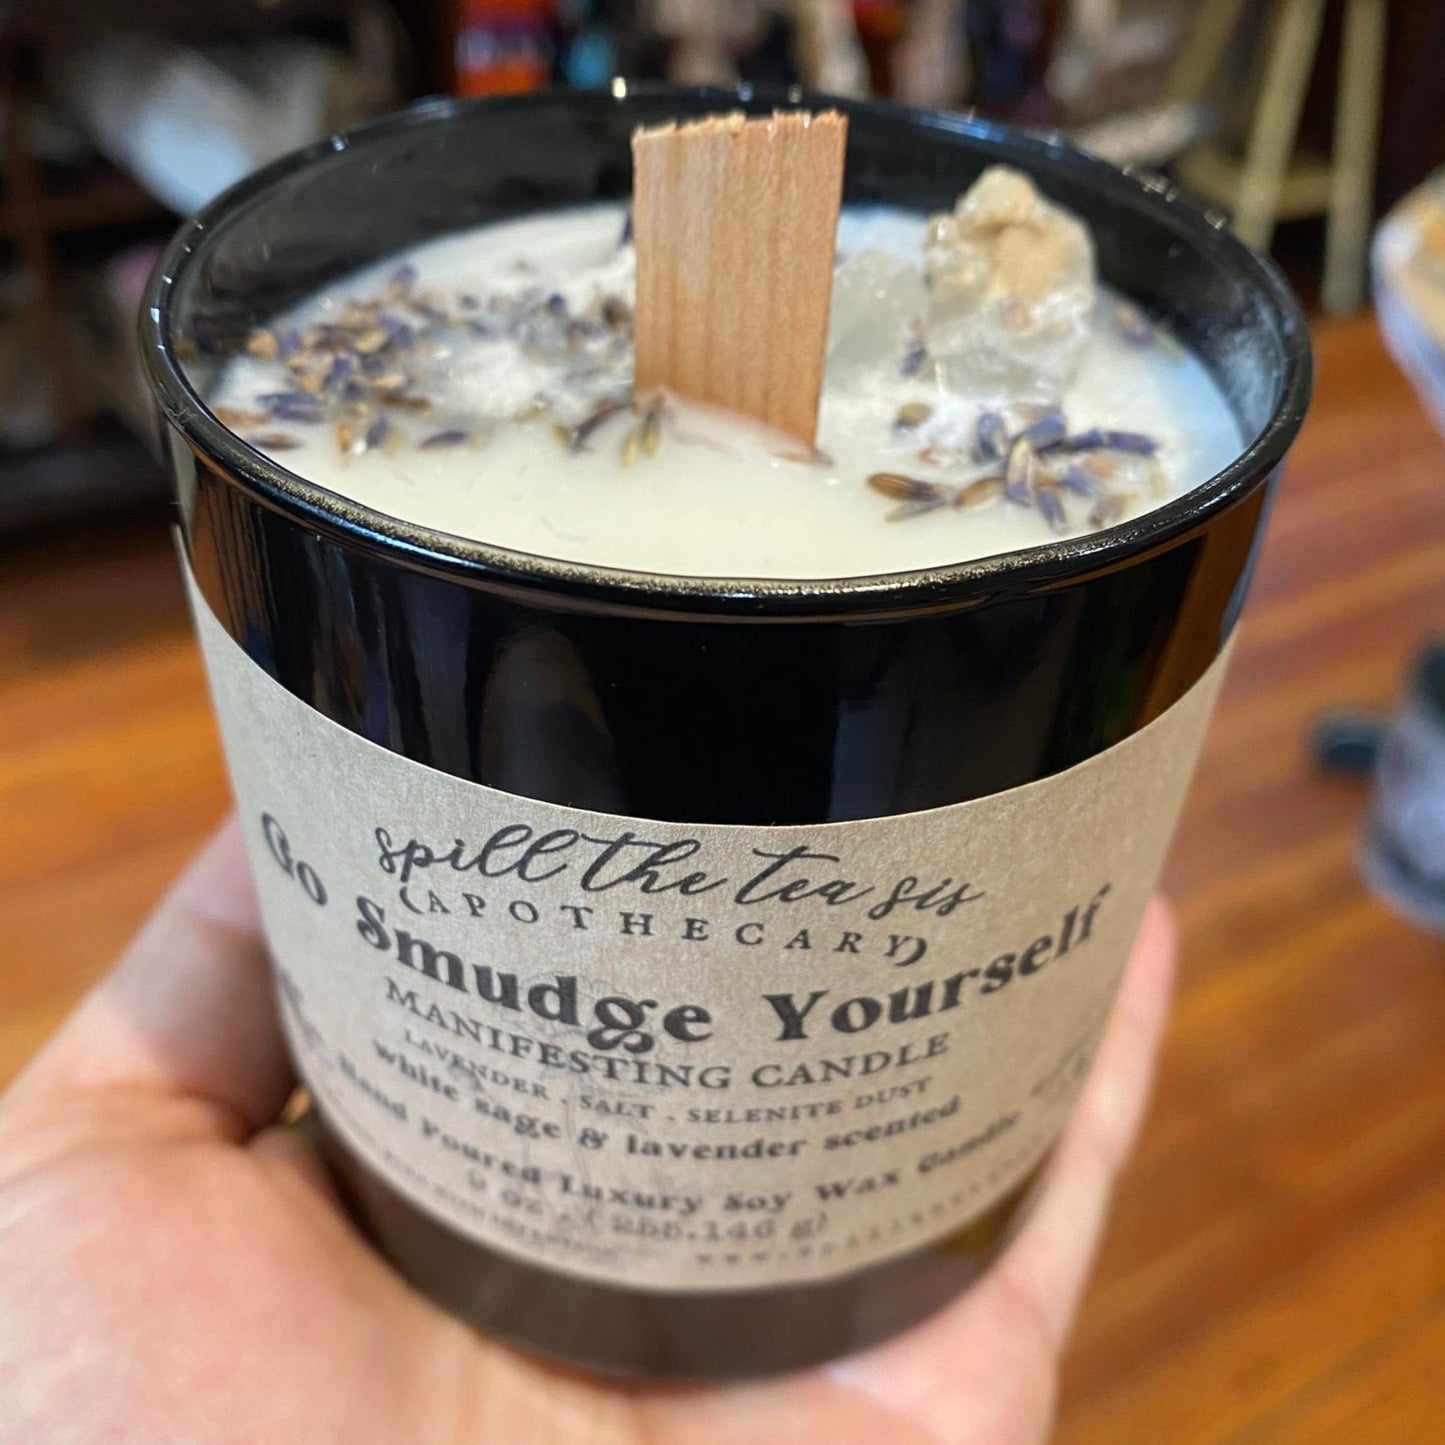 WHOLESALE :: Go Smudge Yourself Manifesting Candle - 9 oz